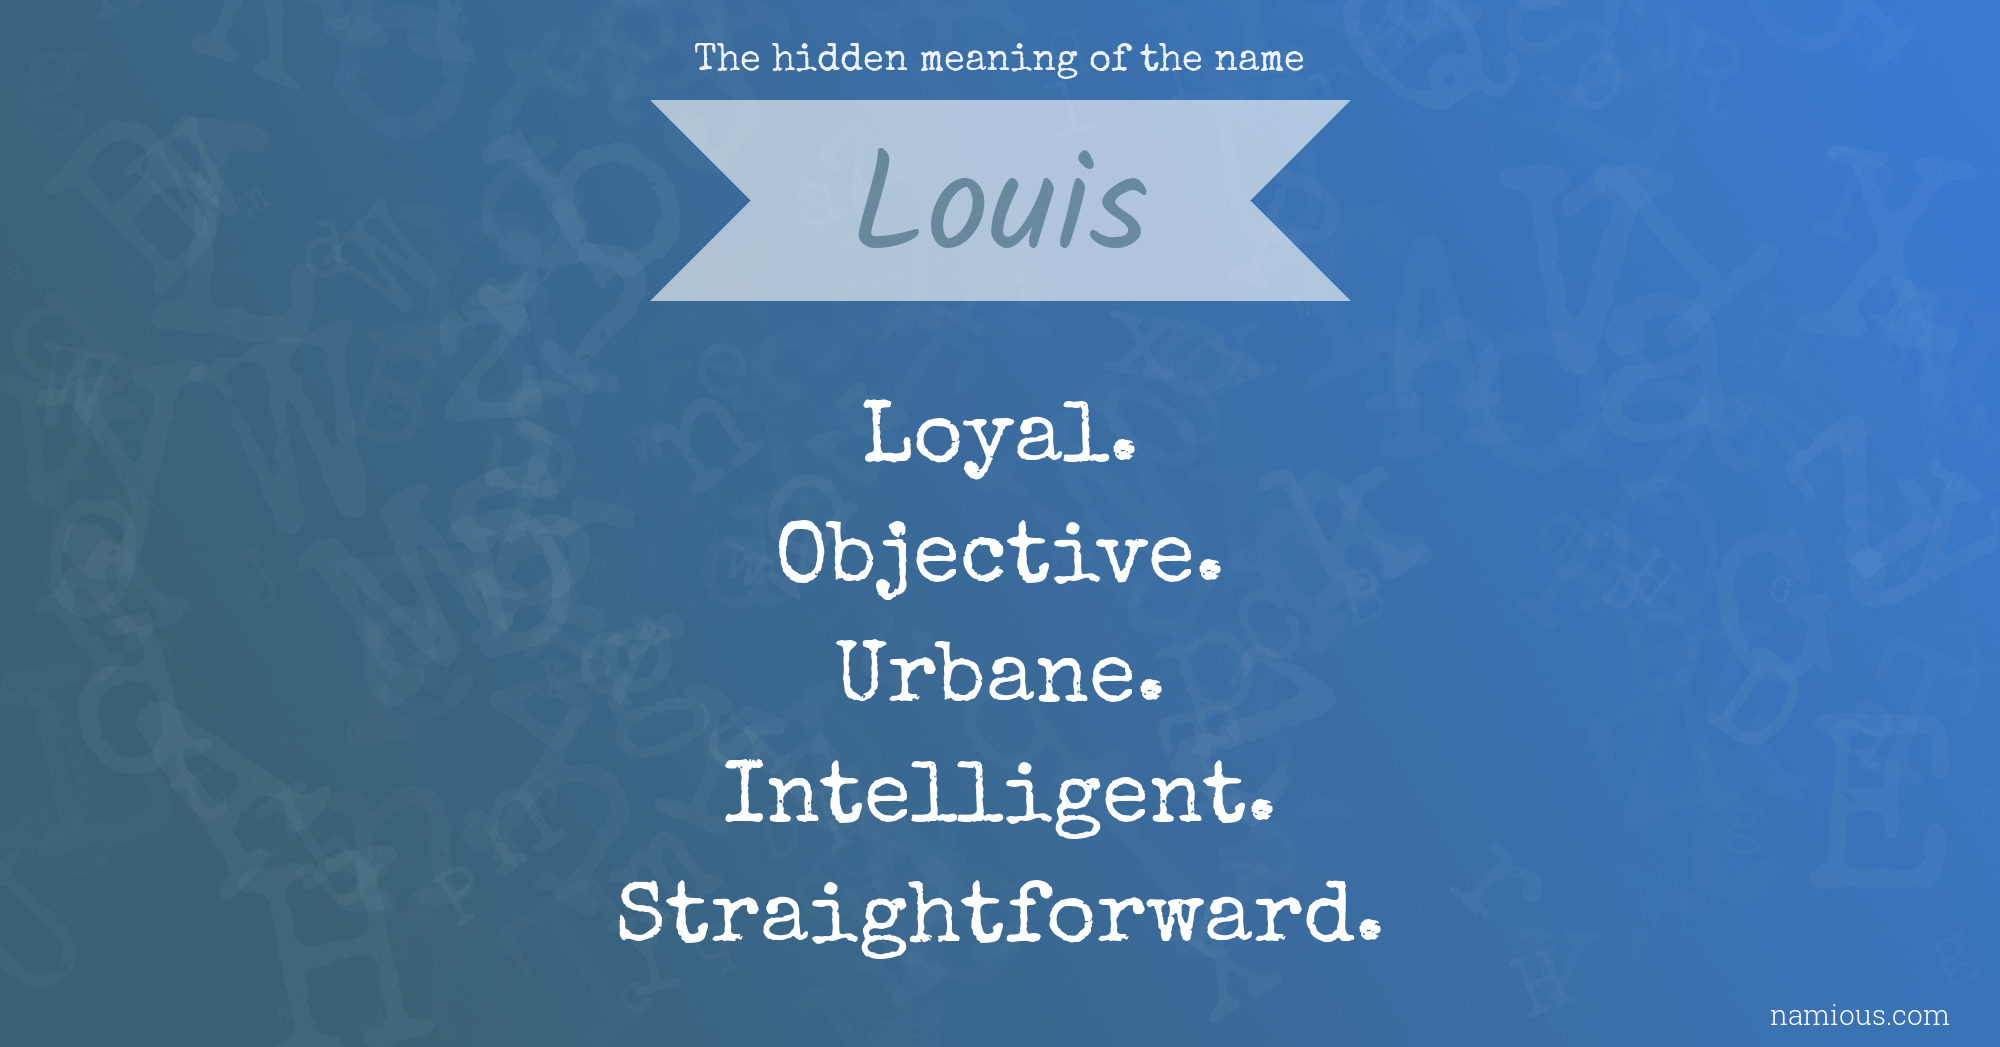 The hidden meaning of the name Louis